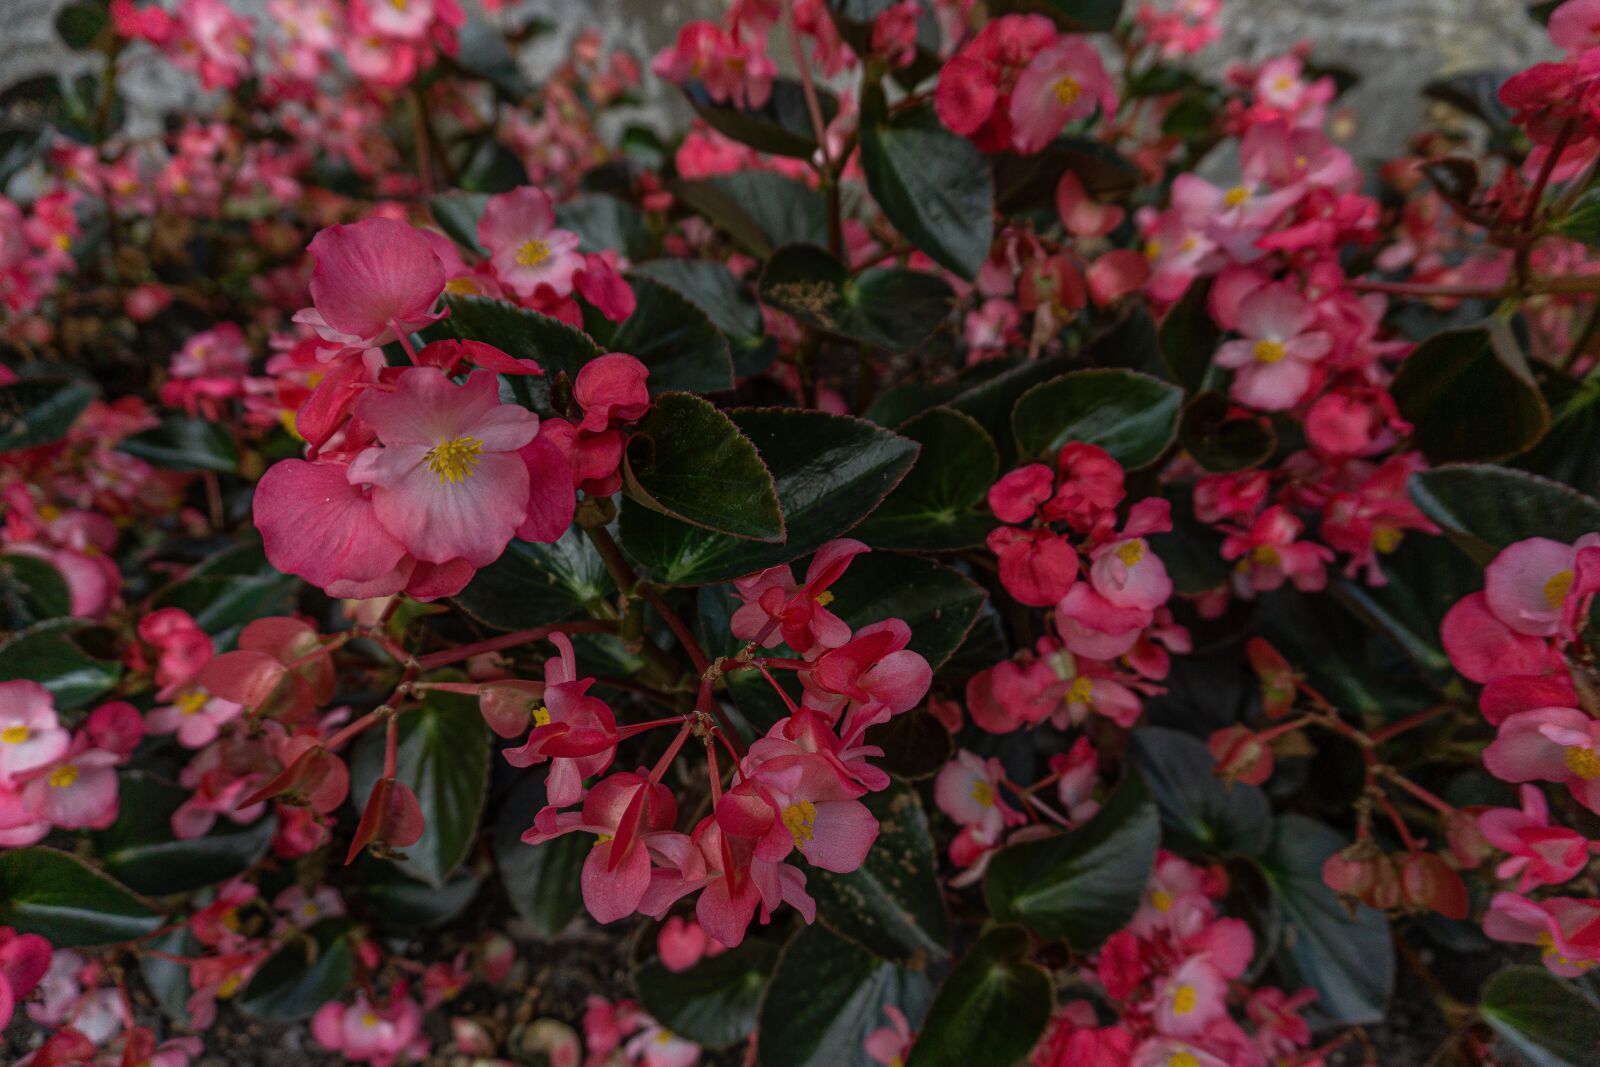 Sony a5100 sample photo. Begonia, flowers, blurred background photography